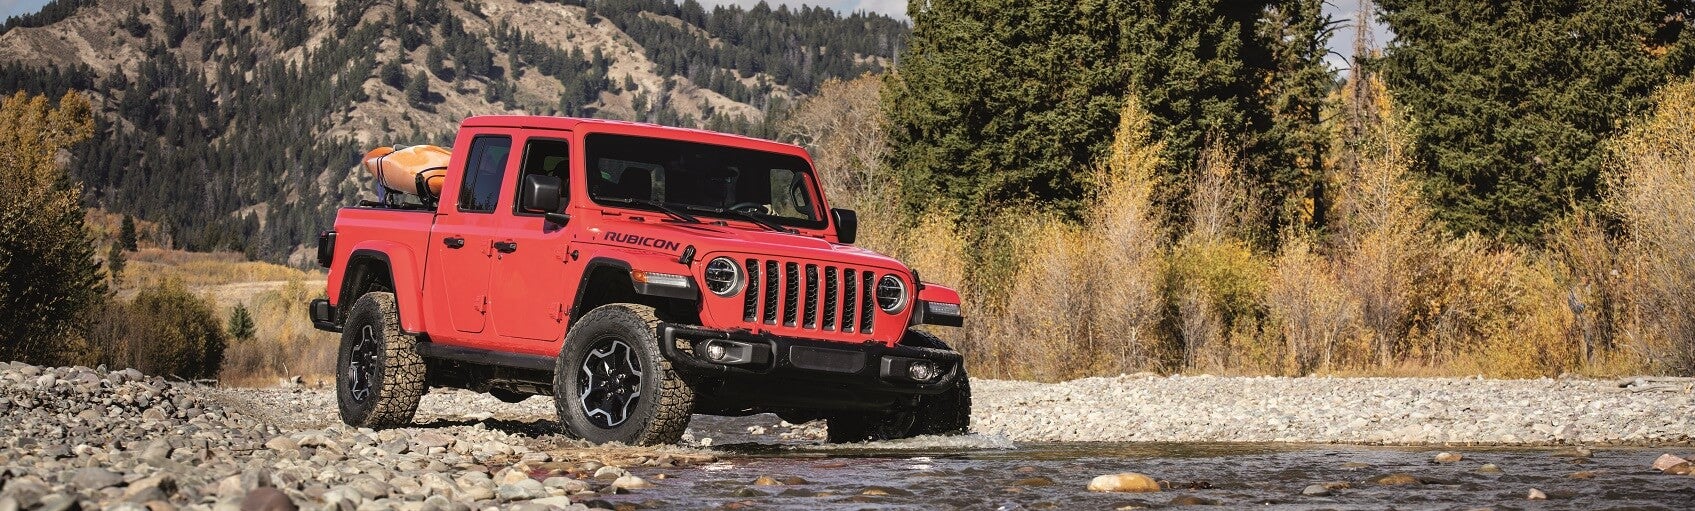 Jeep Gladiator Review